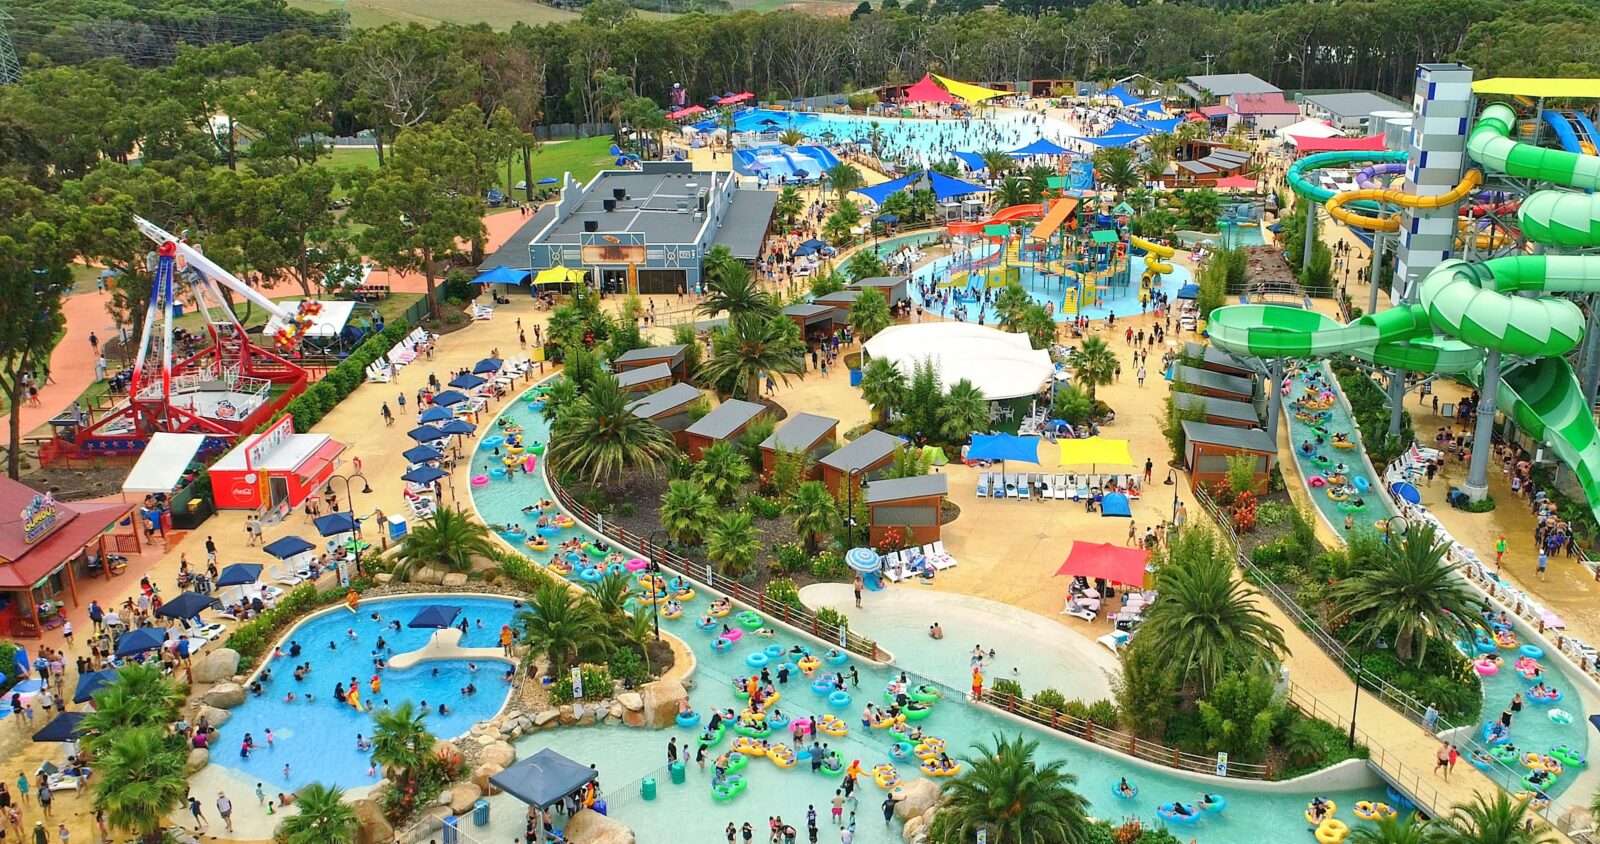 Gumbuya waterpark as seen from above with a birds eye view